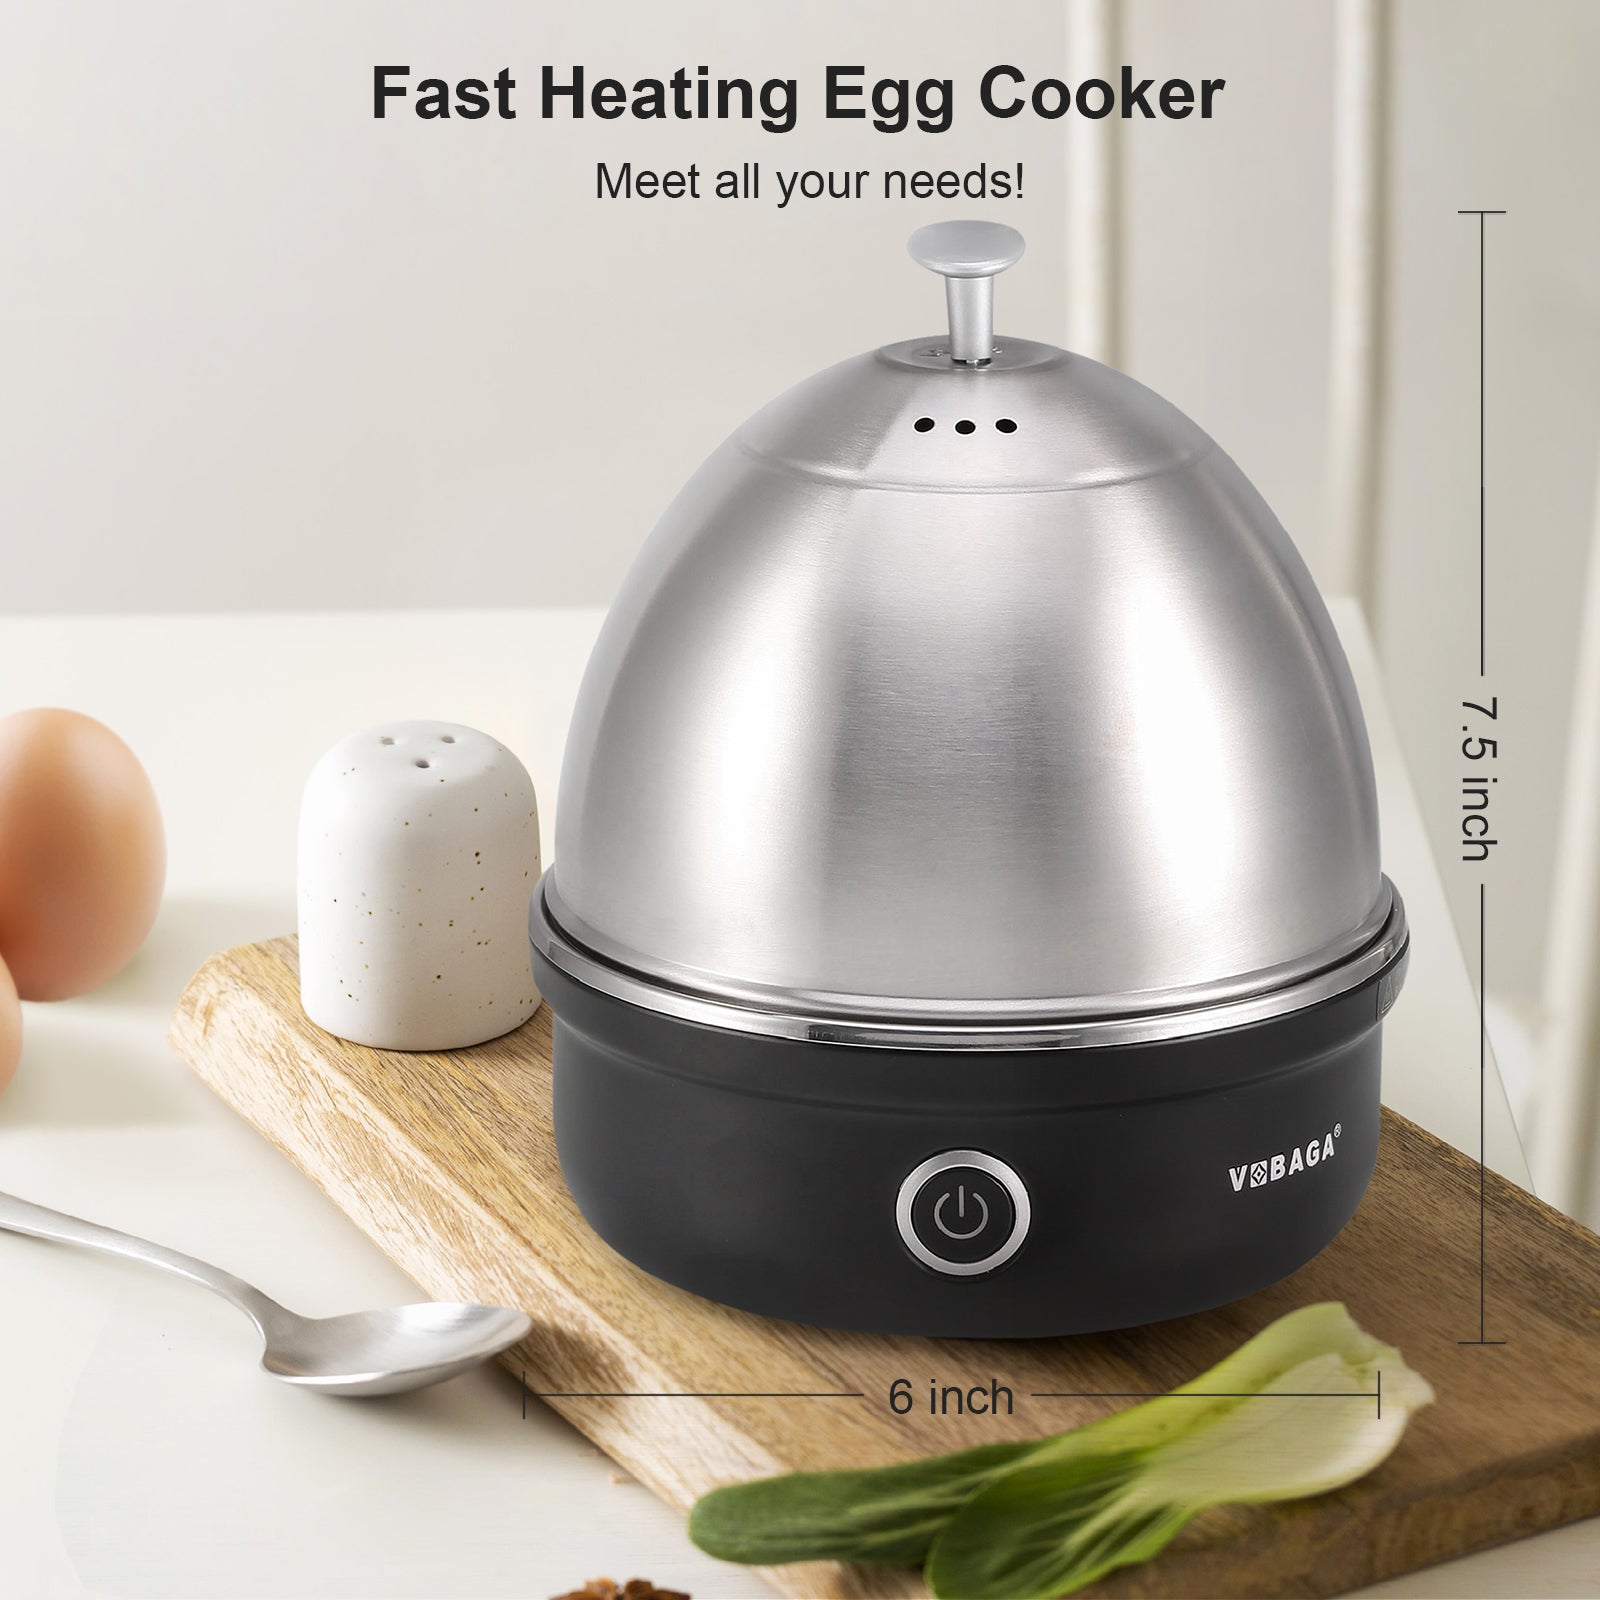  SANJIANKER XB-EC06 14 Egg Capacity Egg Cooker,350W Electric Egg  Maker,Egg Steamer,Egg Boiler,Egg Cooker With Automatic Shut Off, Egg Cooker  with Egg Piercer,White: Home & Kitchen